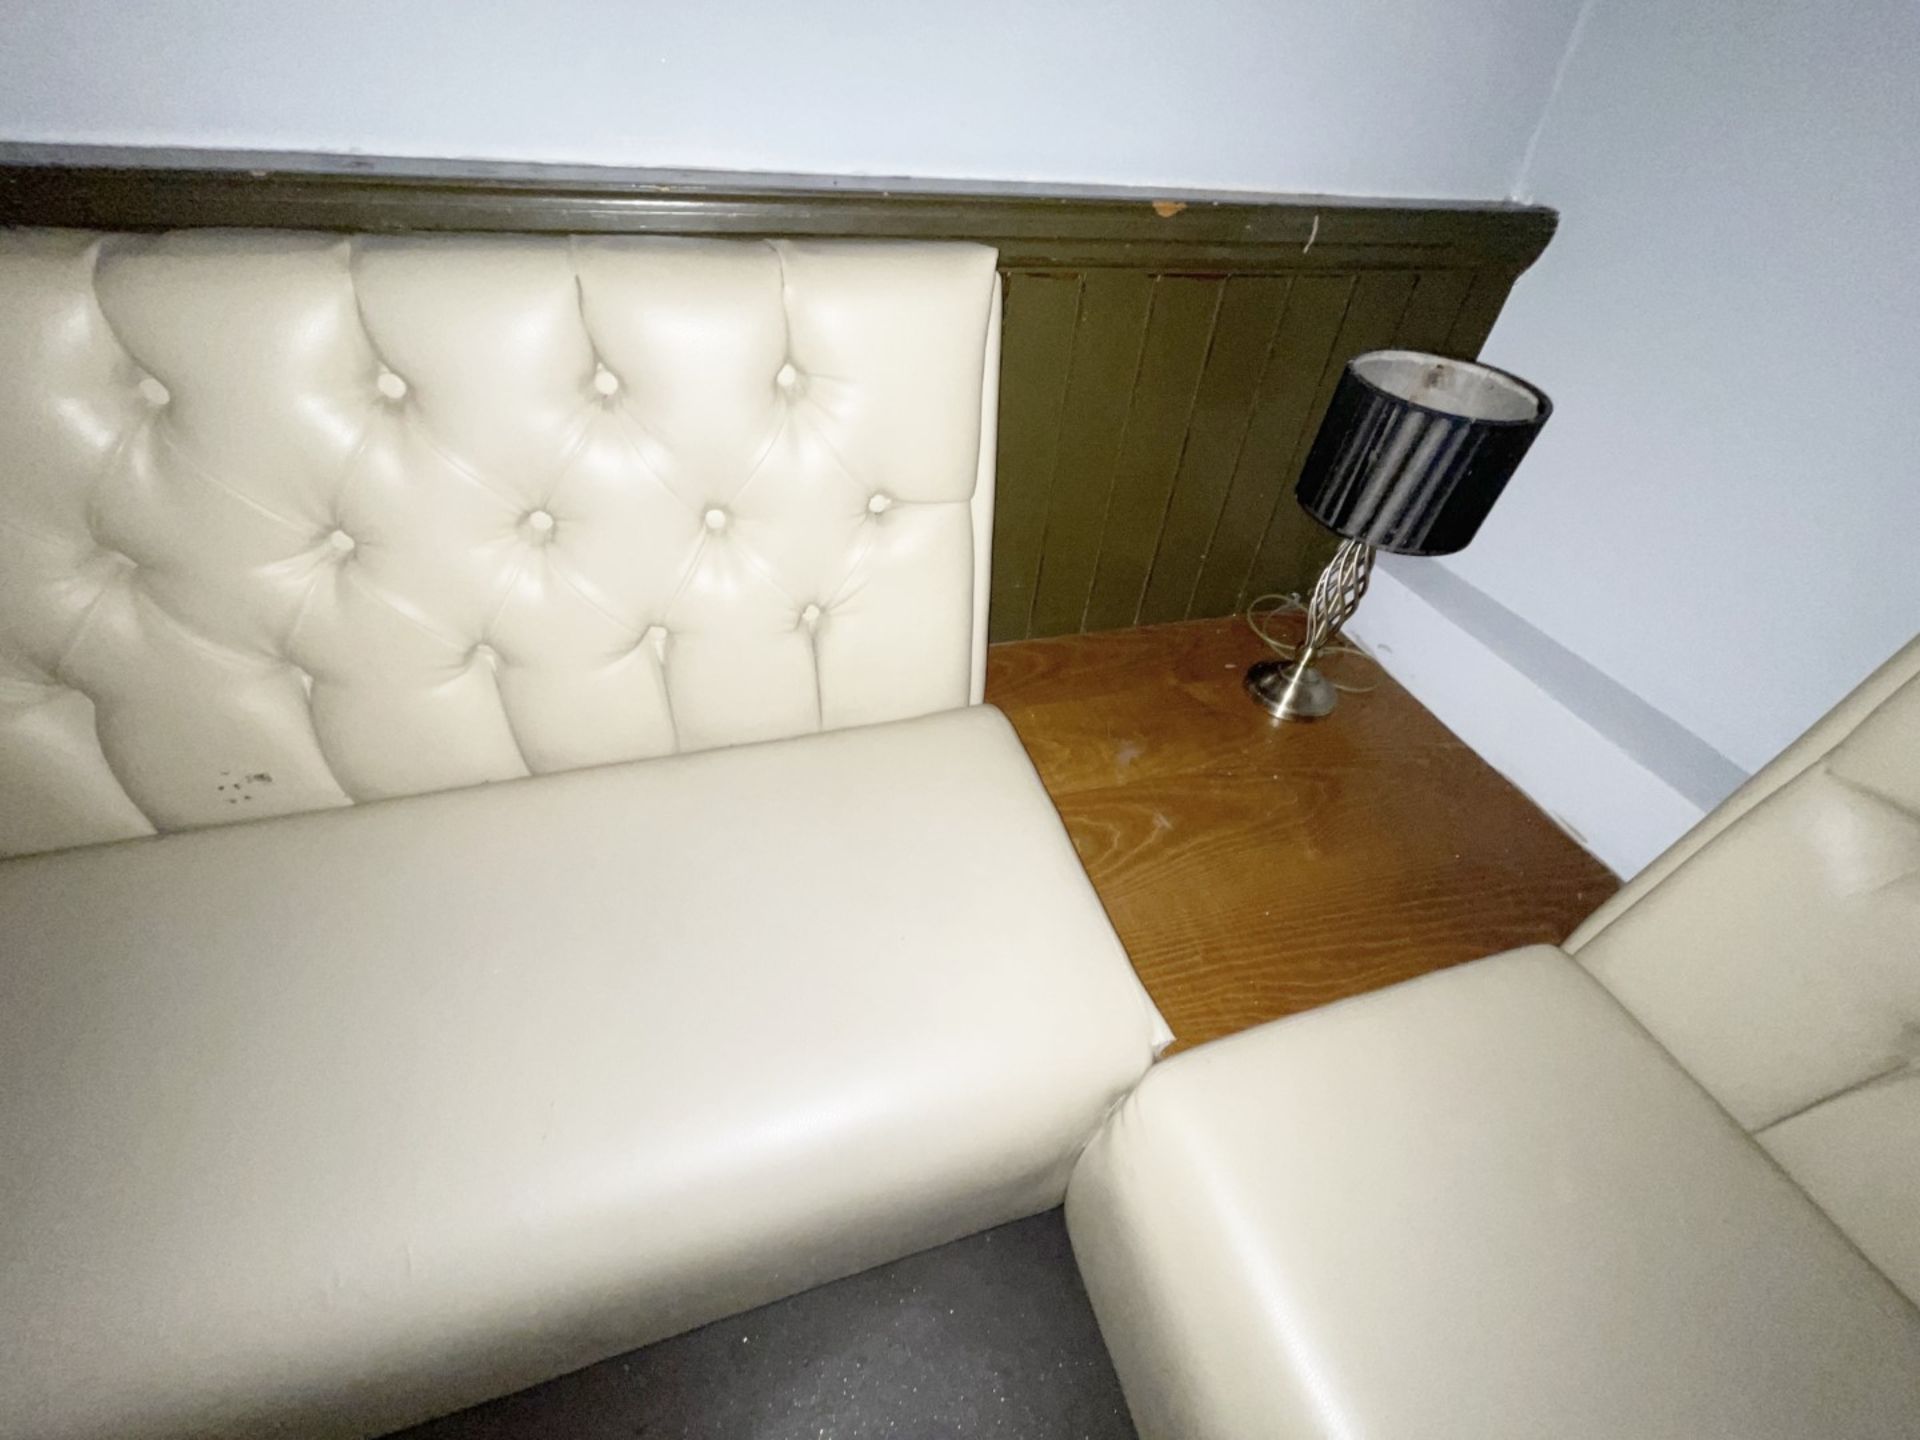 5 x Sections of Commercial Button Back Banquette Booth Seating Upholstered in a Cream Faux Leather - Image 9 of 14